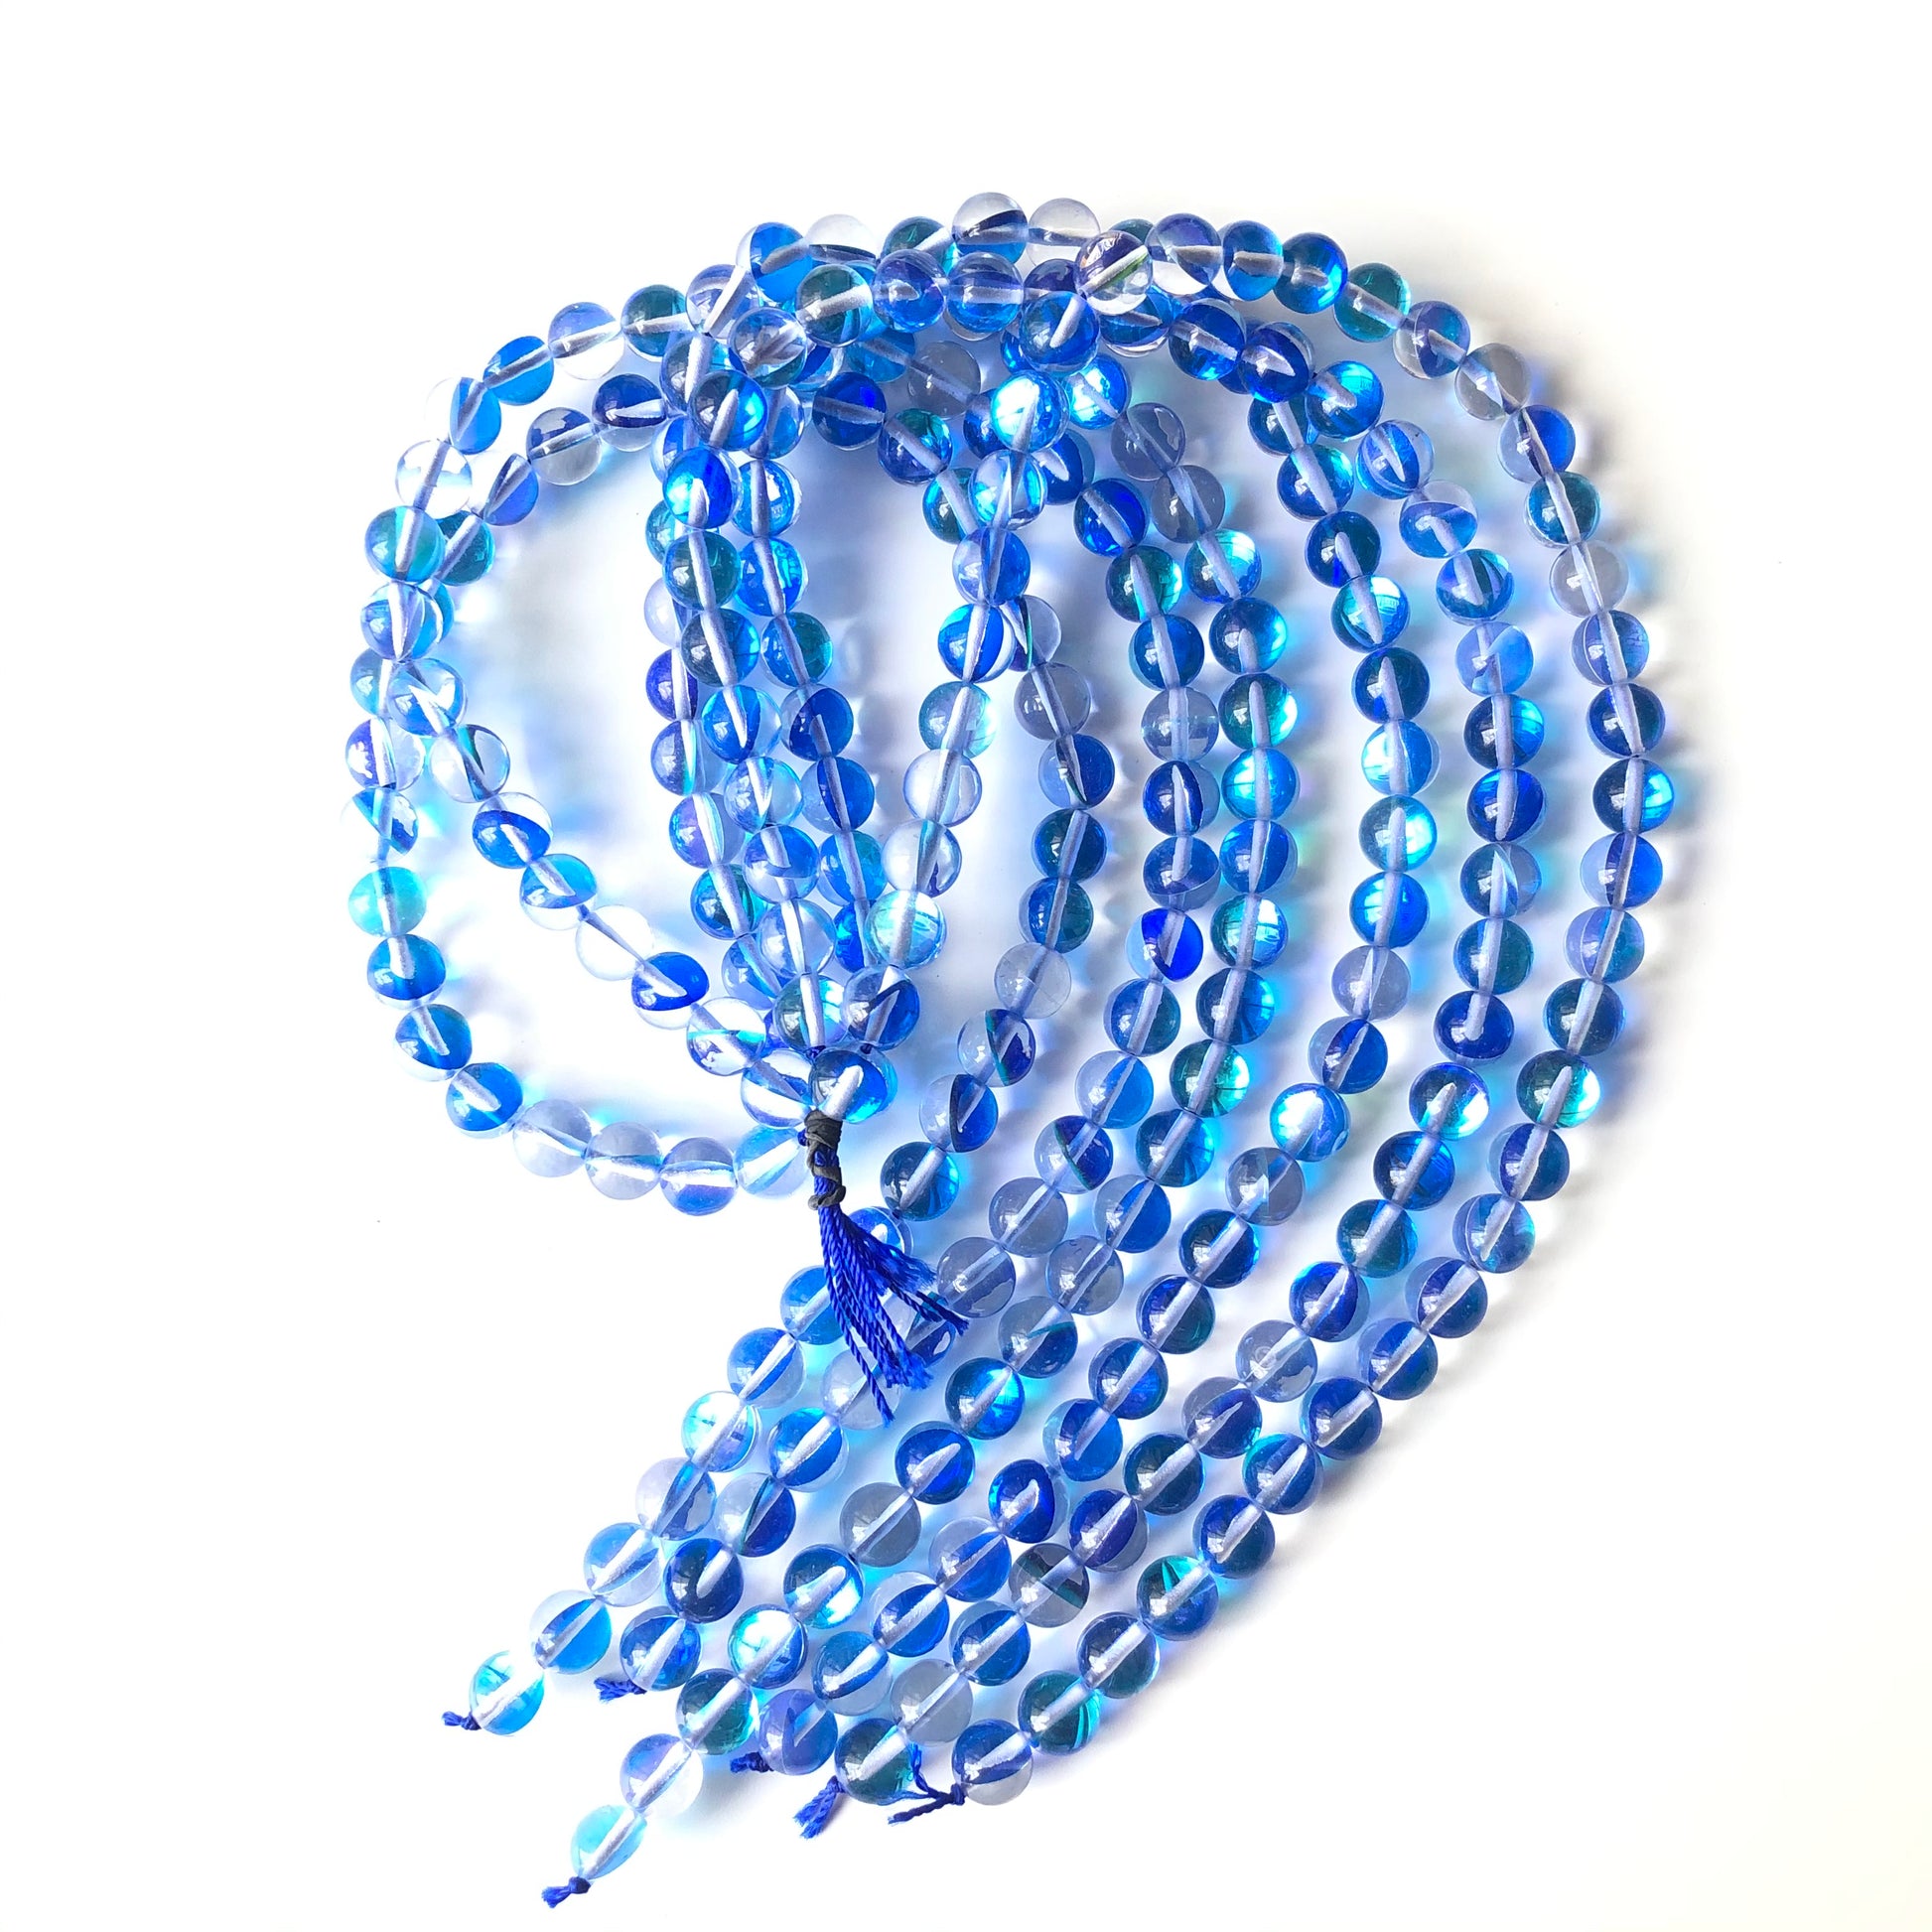 2 Strands/lot 10mm Blue Moonstone Beads Glass Beads Round Glass Beads Charms Beads Beyond